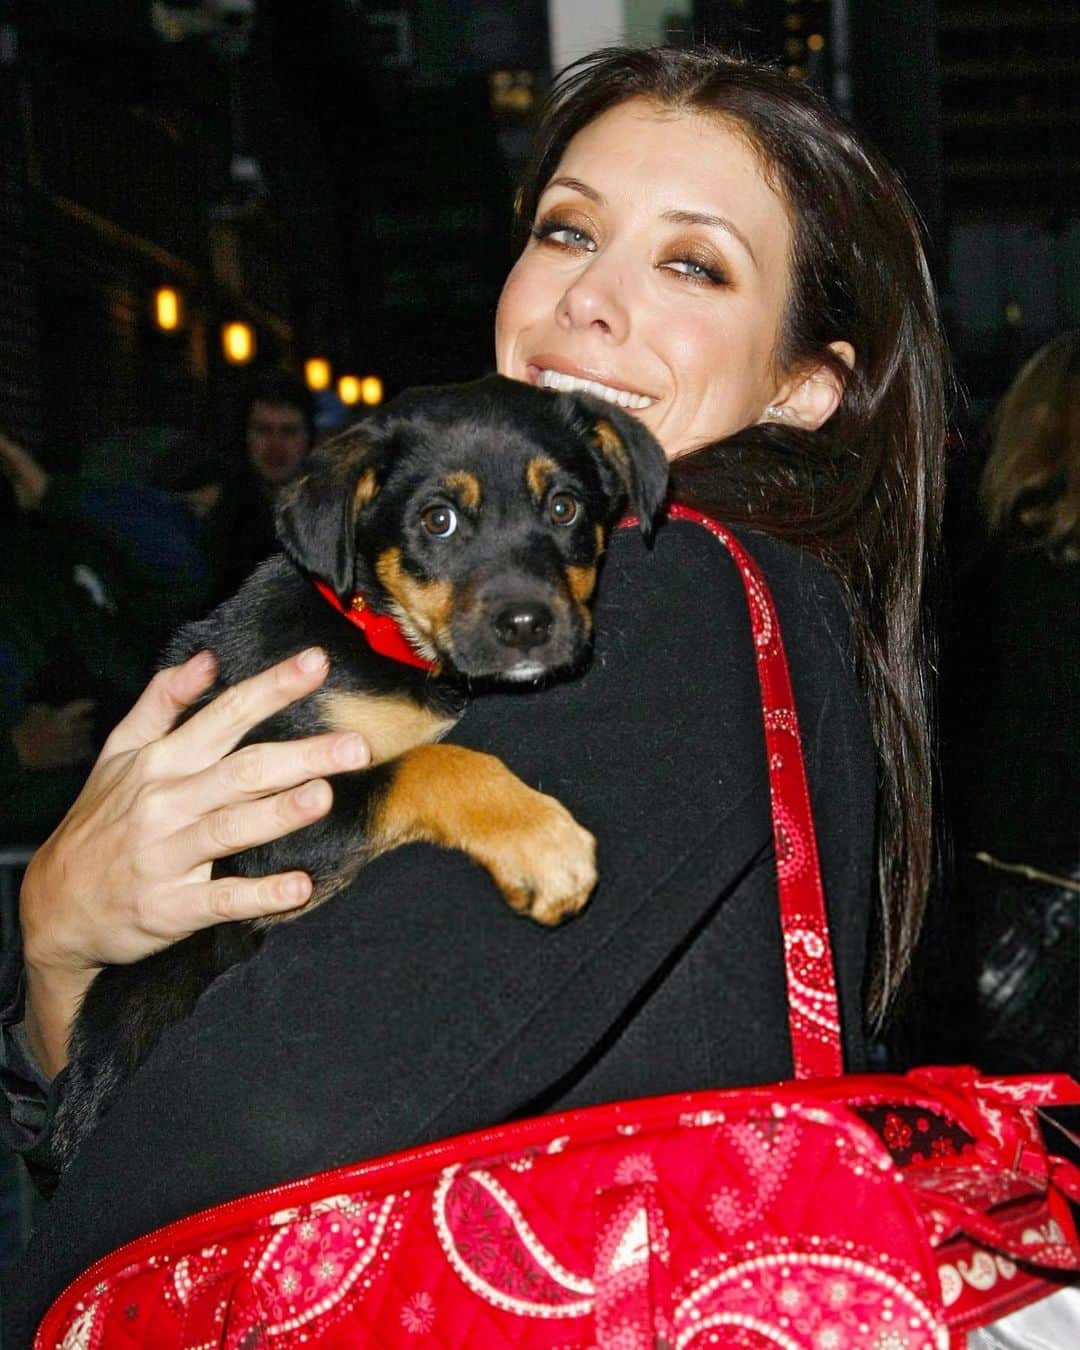 ケイト・ウォルシュさんのインスタグラム写真 - (ケイト・ウォルシュInstagram)「Rosie Walsh, aka Rosie The Dog, aka Rosie Perez, aka Rose Hound, Rosebud, Roro has left us after 15 years, 3 months of loyal service. 💫 💔 Rosie was born under a house in the Bronx and I adopted her just 8 weeks later as part of a dog adoption campaign with @AnimalHaven in NYC & took her back to Los Angeles to hang out with Lucy, Billy, Pablo & me. (I initially couldn’t decide between Rosie and her brother Amico, so when I chose Rosie, my brother Sean adopted Amico and took him home to Seattle 😊)  We had so many amazing years together, from the Hollywood Hills to the dog parks of Los Feliz & Encino, to the snowy mountains of Lake Tahoe, to the beaches of Malibu to the streets of NYC & Washington square park, and finally to Perth, where she has endlessly walked & swam the beaches, the Swan river, and vigorously rounded the cricket oval & trails as if she was expected at the Swanbourne Bridge Club! 😂 Rosie had an iron will to live and was my always companion…whenever I could bring her to set I would, and when I couldn’t I had the best people looking after her.  She kept Lucy the Dog, Billy & Pablo company until they left this world and I’m so grateful for all she taught me and very, very grateful that she waited for me to come back from LA say goodbye to me snout to snout. I am also incredibly grateful for Mikey Lage (@MrHollywoof), Heather Tobin (@Southern_Spirit_Farm), #CristyDavey and Tina Van Leuven (@UpliftersNation) and all the others who have walked Rosie & loved her so well. And thanks too to all of the wonderful veterinarians all over the world, but especially here in Perth who helped her with her palliative care and eventually her transition at home. I honestly think she was the happiest here in her Western Australia retirement.」4月13日 3時44分 - katewalsh